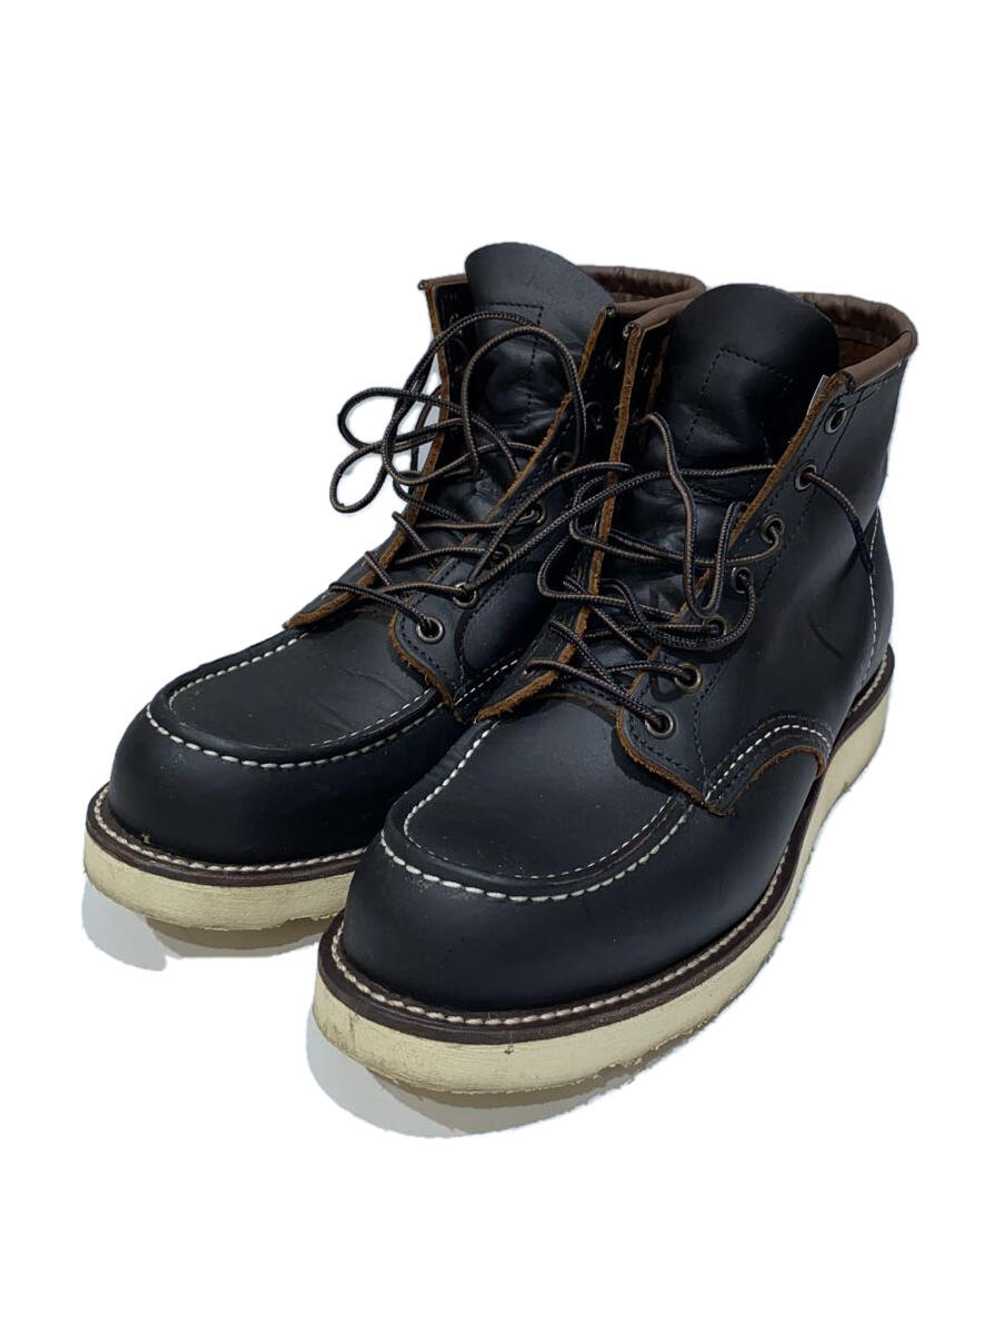 Red Wing  Engineer Boots 27Cm   Leather 8849 Shoes - image 2